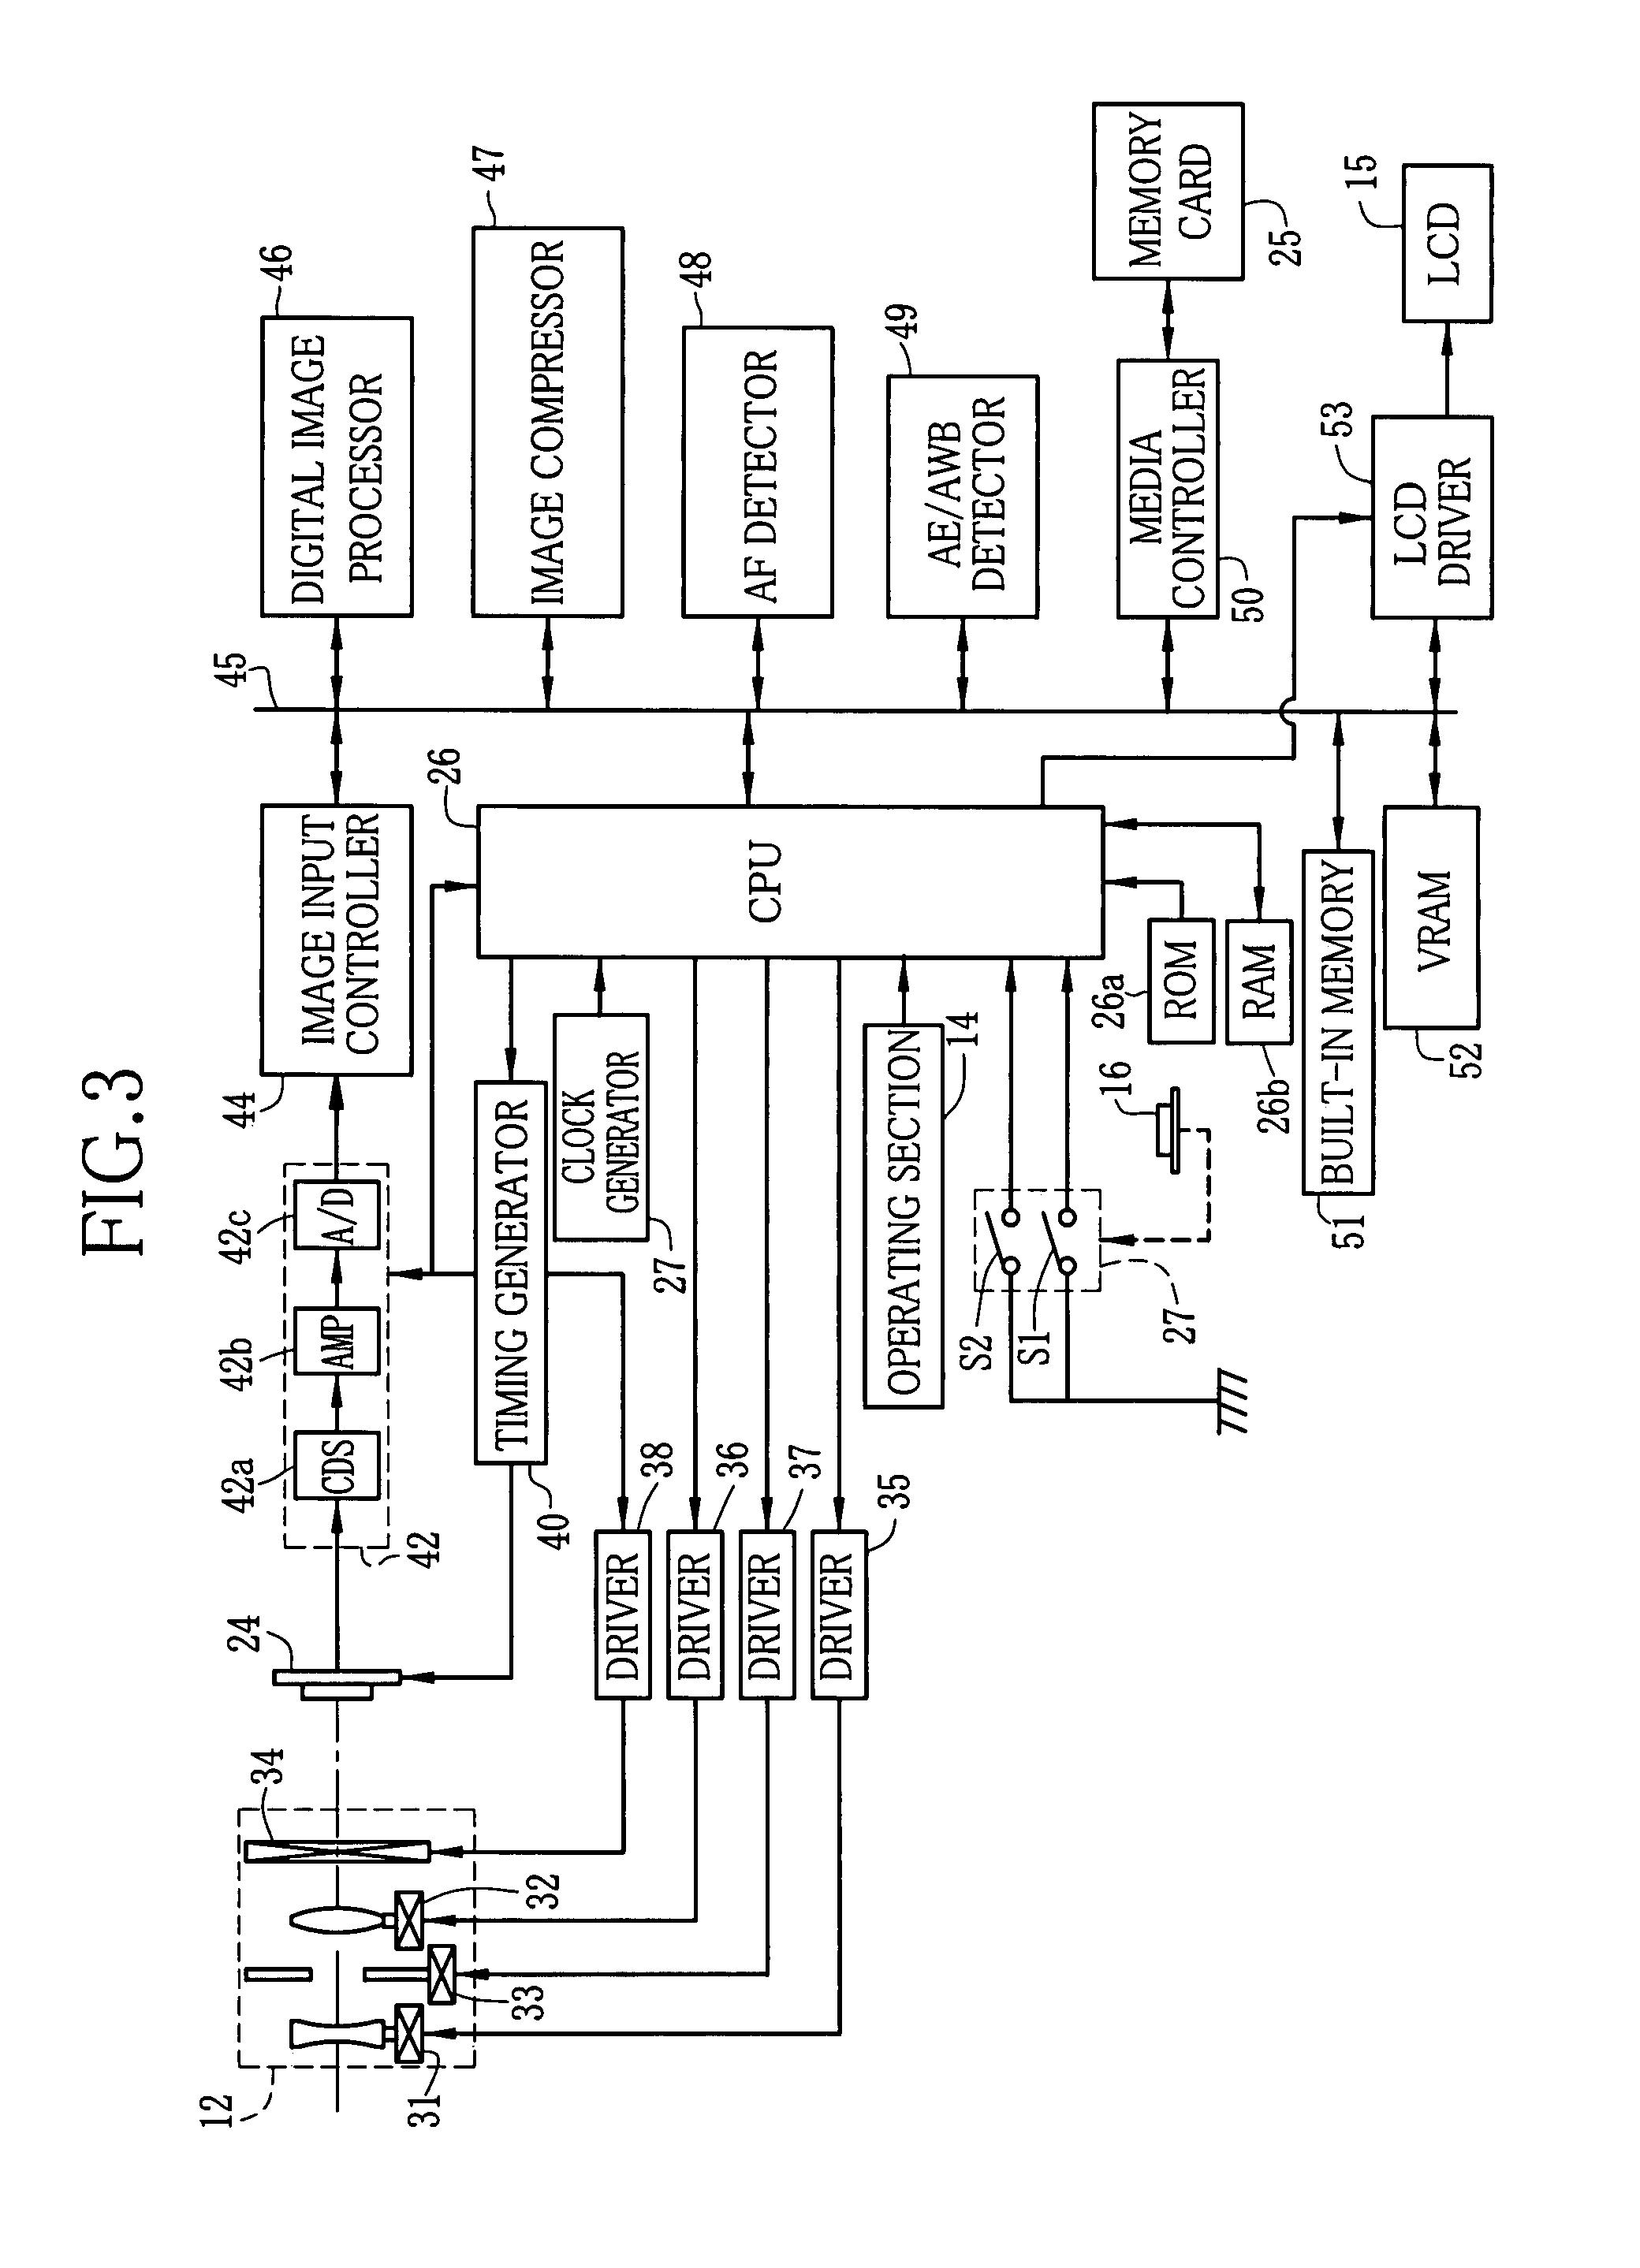 Imaging apparatus with memory for storing camera through image data